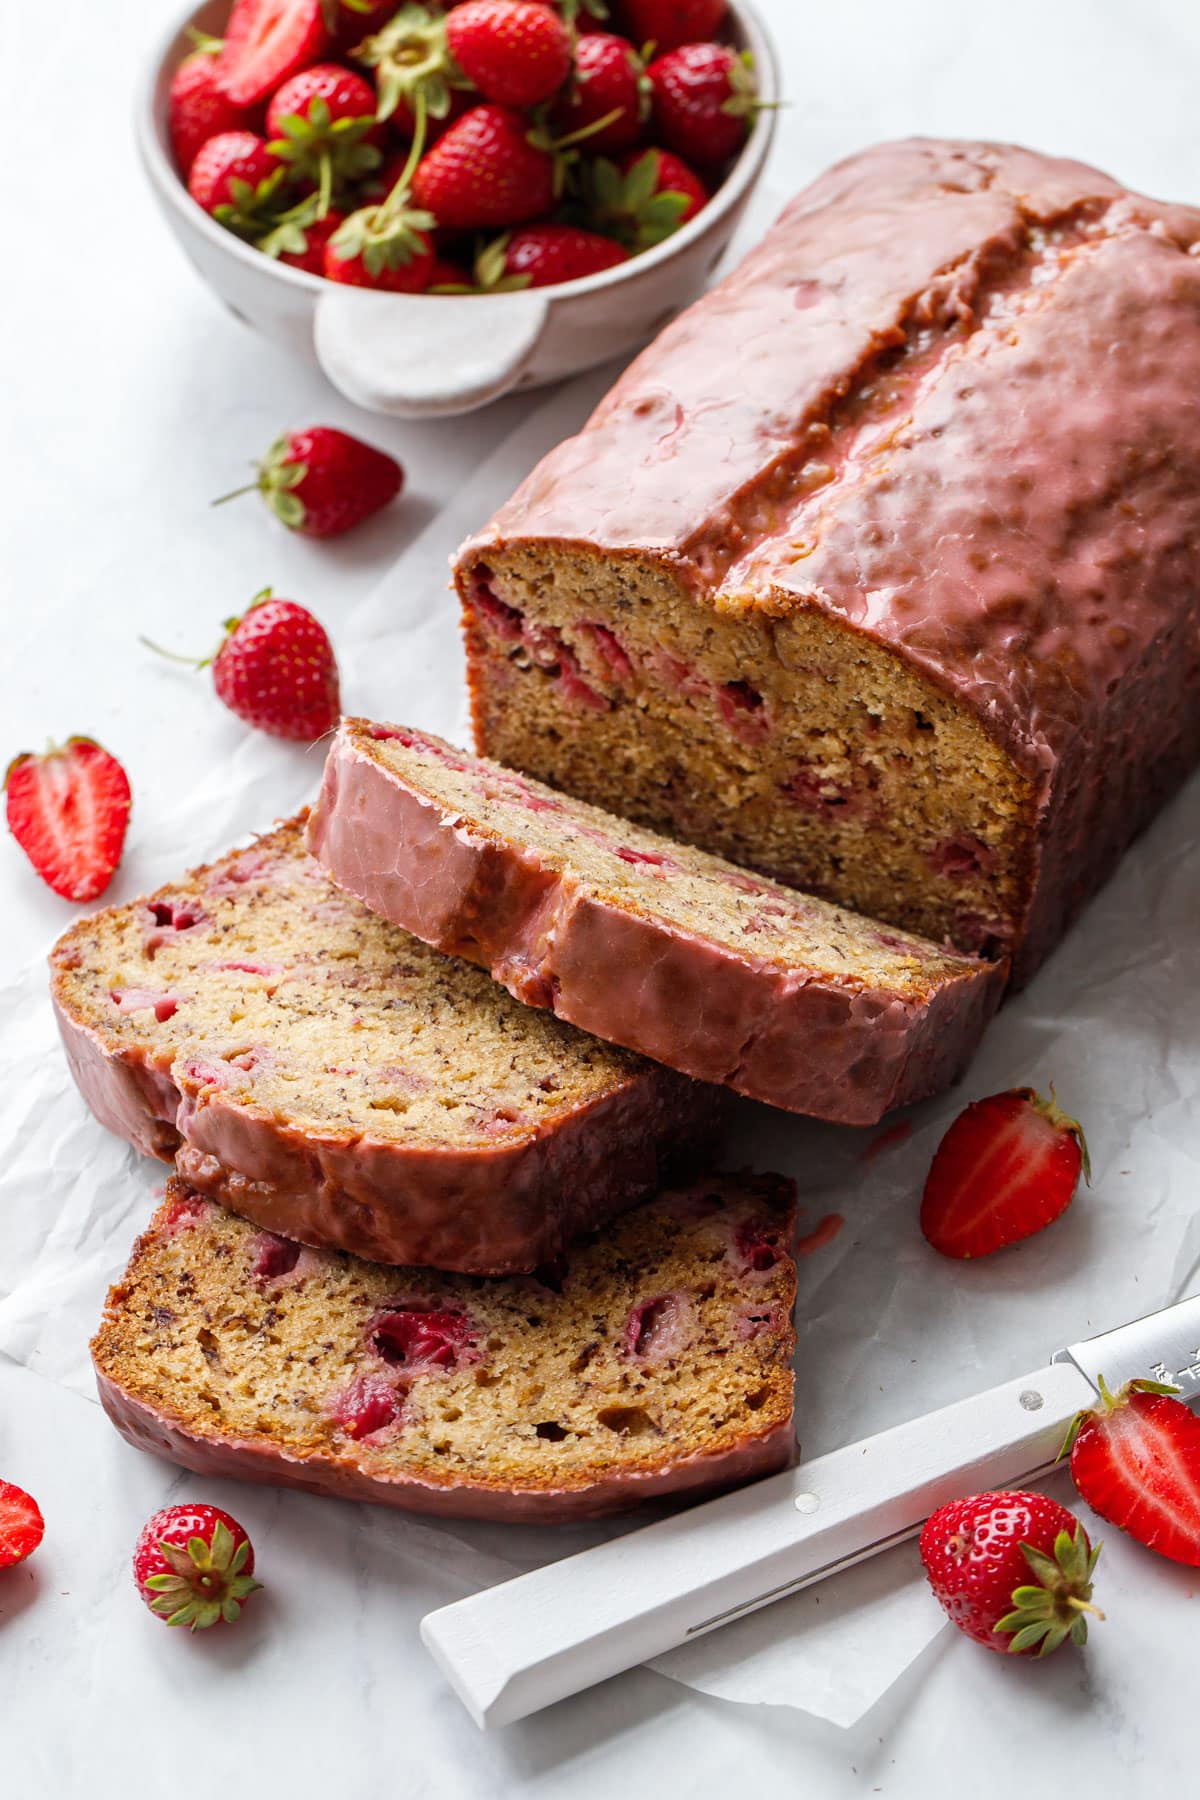 Loaf of Strawberry Banana Bread with a pink strawberry glaze, slices laying down to show the moist inner texture studded with pockets of fresh strawberries.